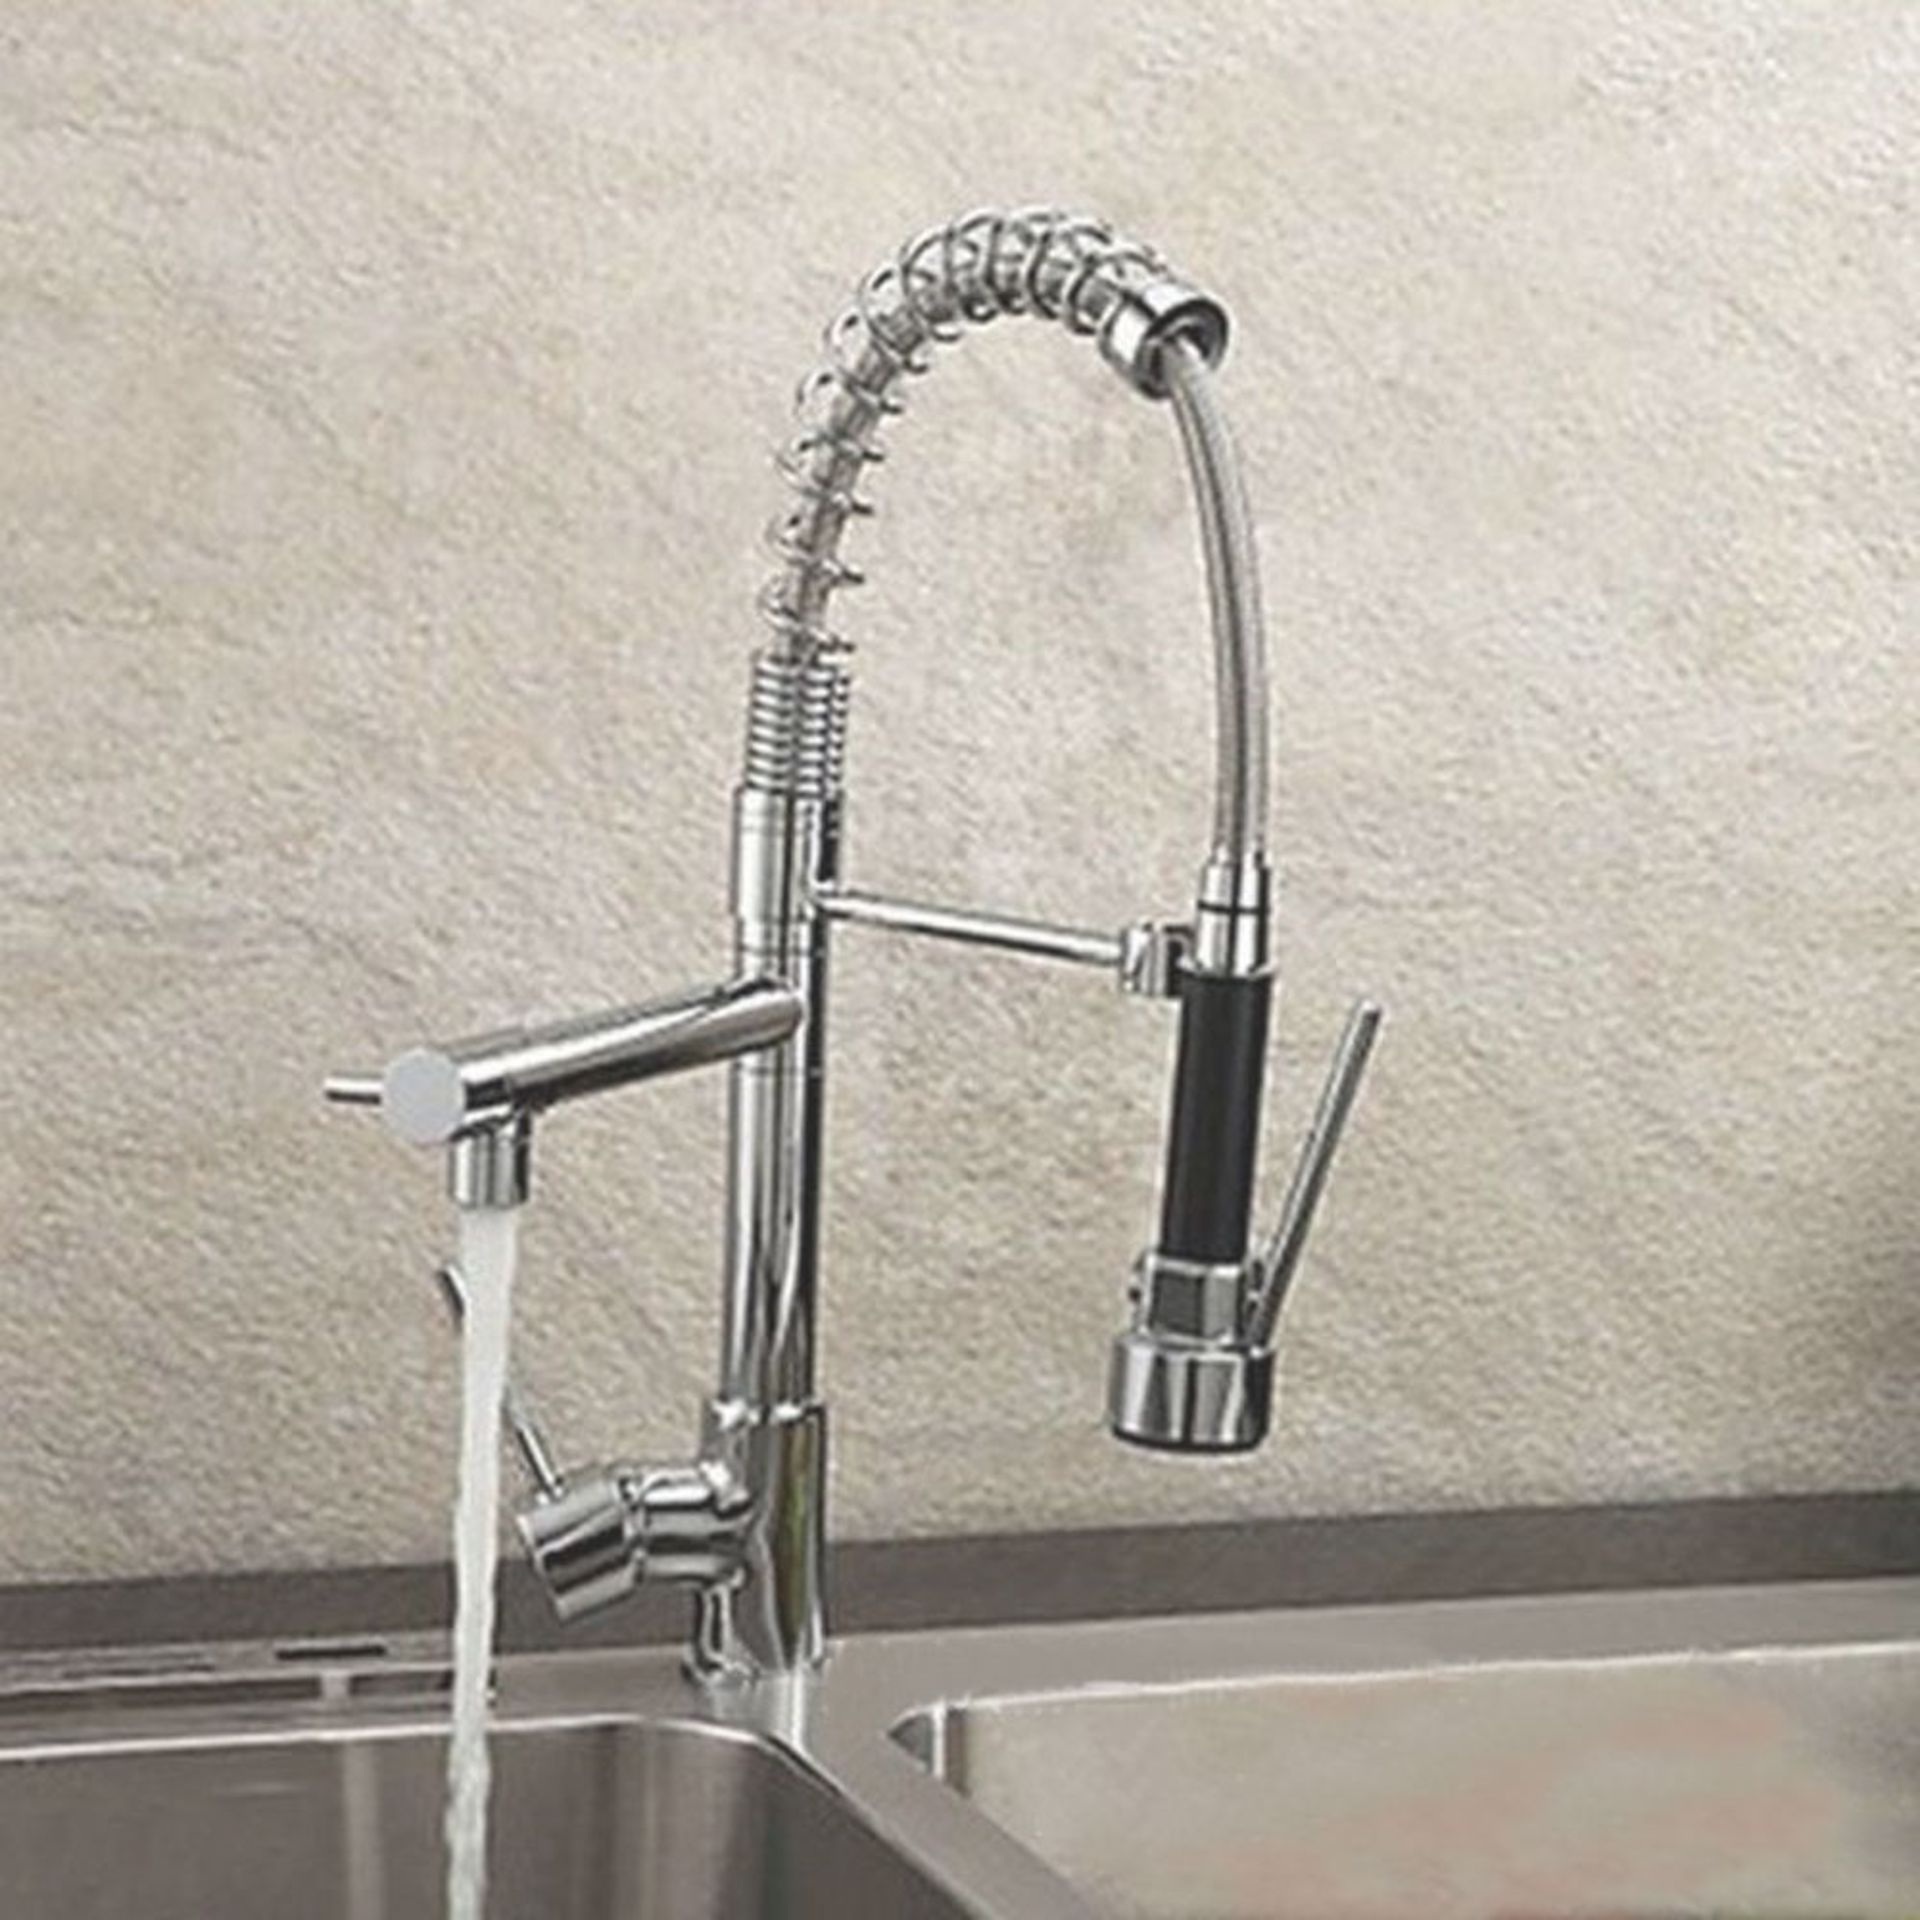 Bentley Modern Monobloc Chrome Brass Pull Out Spray Mixer Tap. RRP £349.99.This tap is from